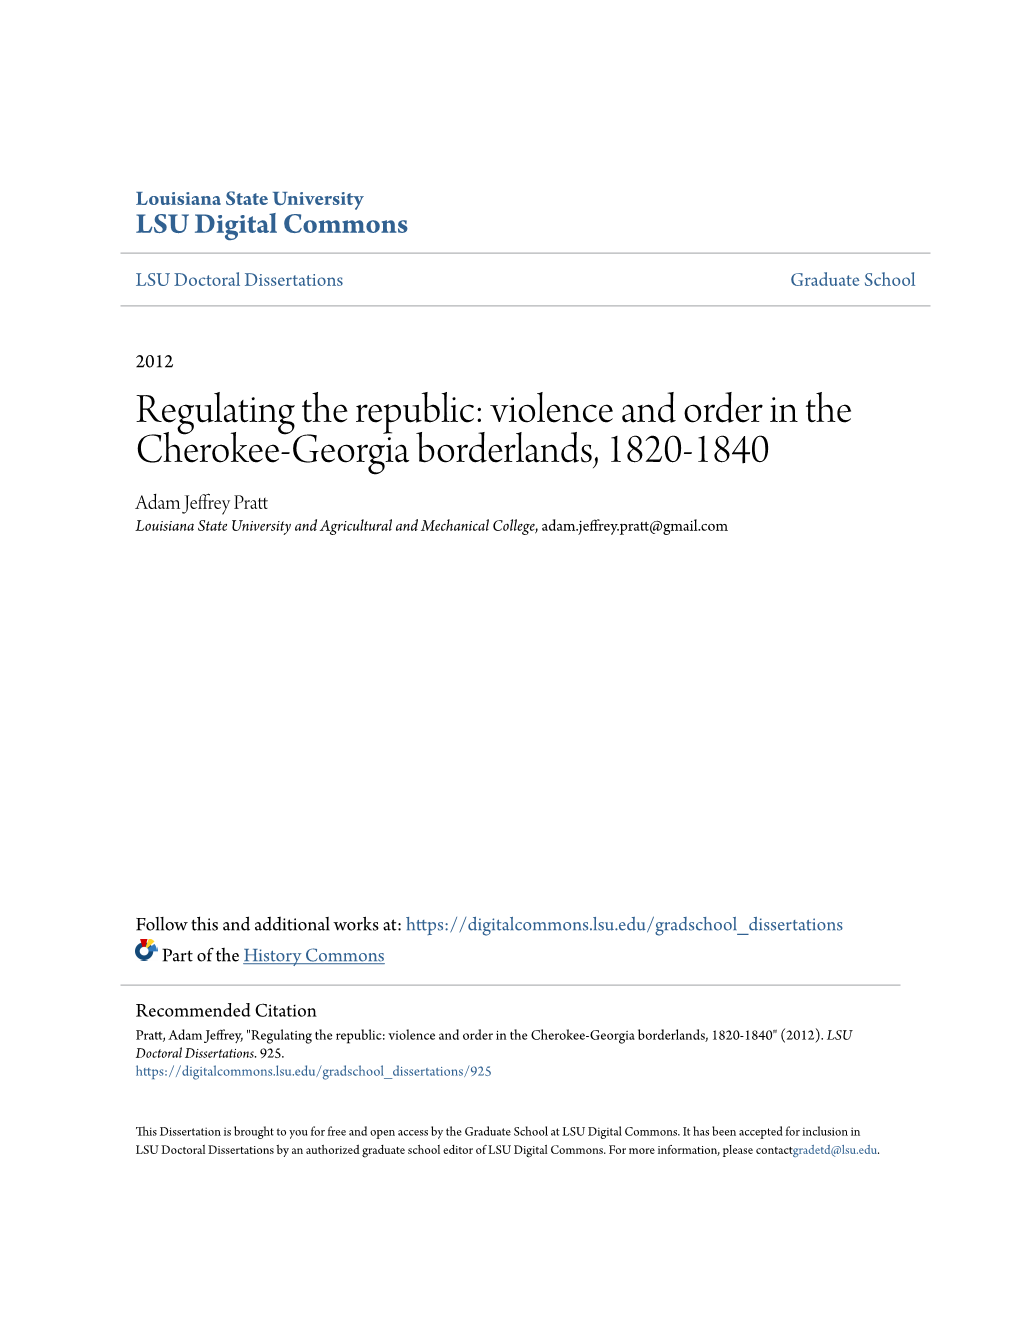 Violence and Order in the Cherokee-Georgia Borderlands